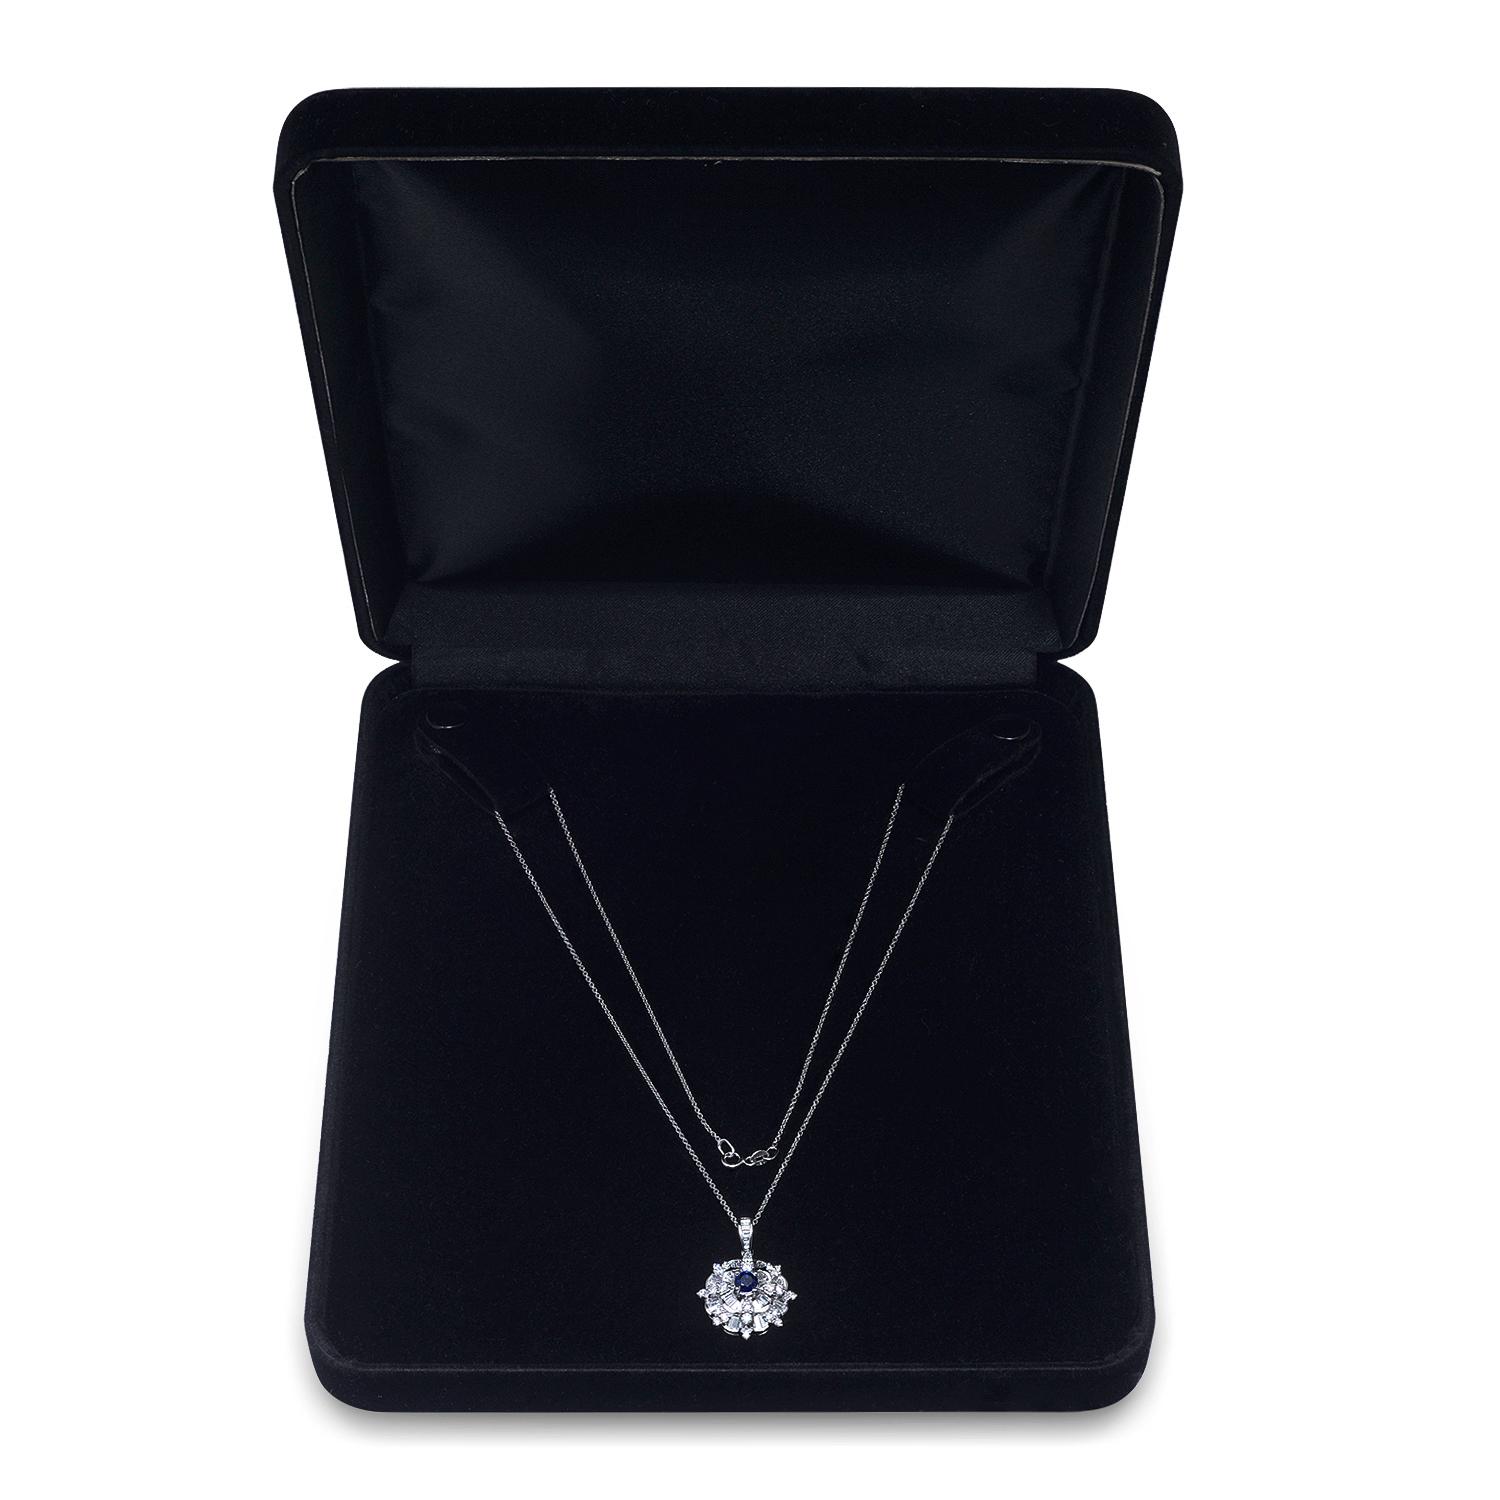 14K White Gold Setting with 0.20ct Sapphire and 1.30ct Diamond Pendant